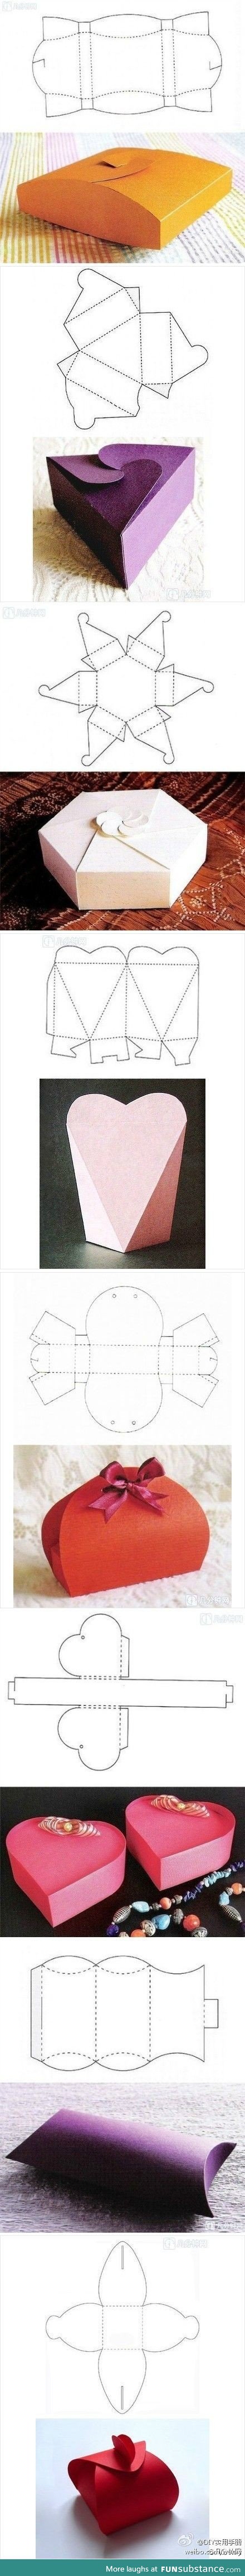 How to fold boxes